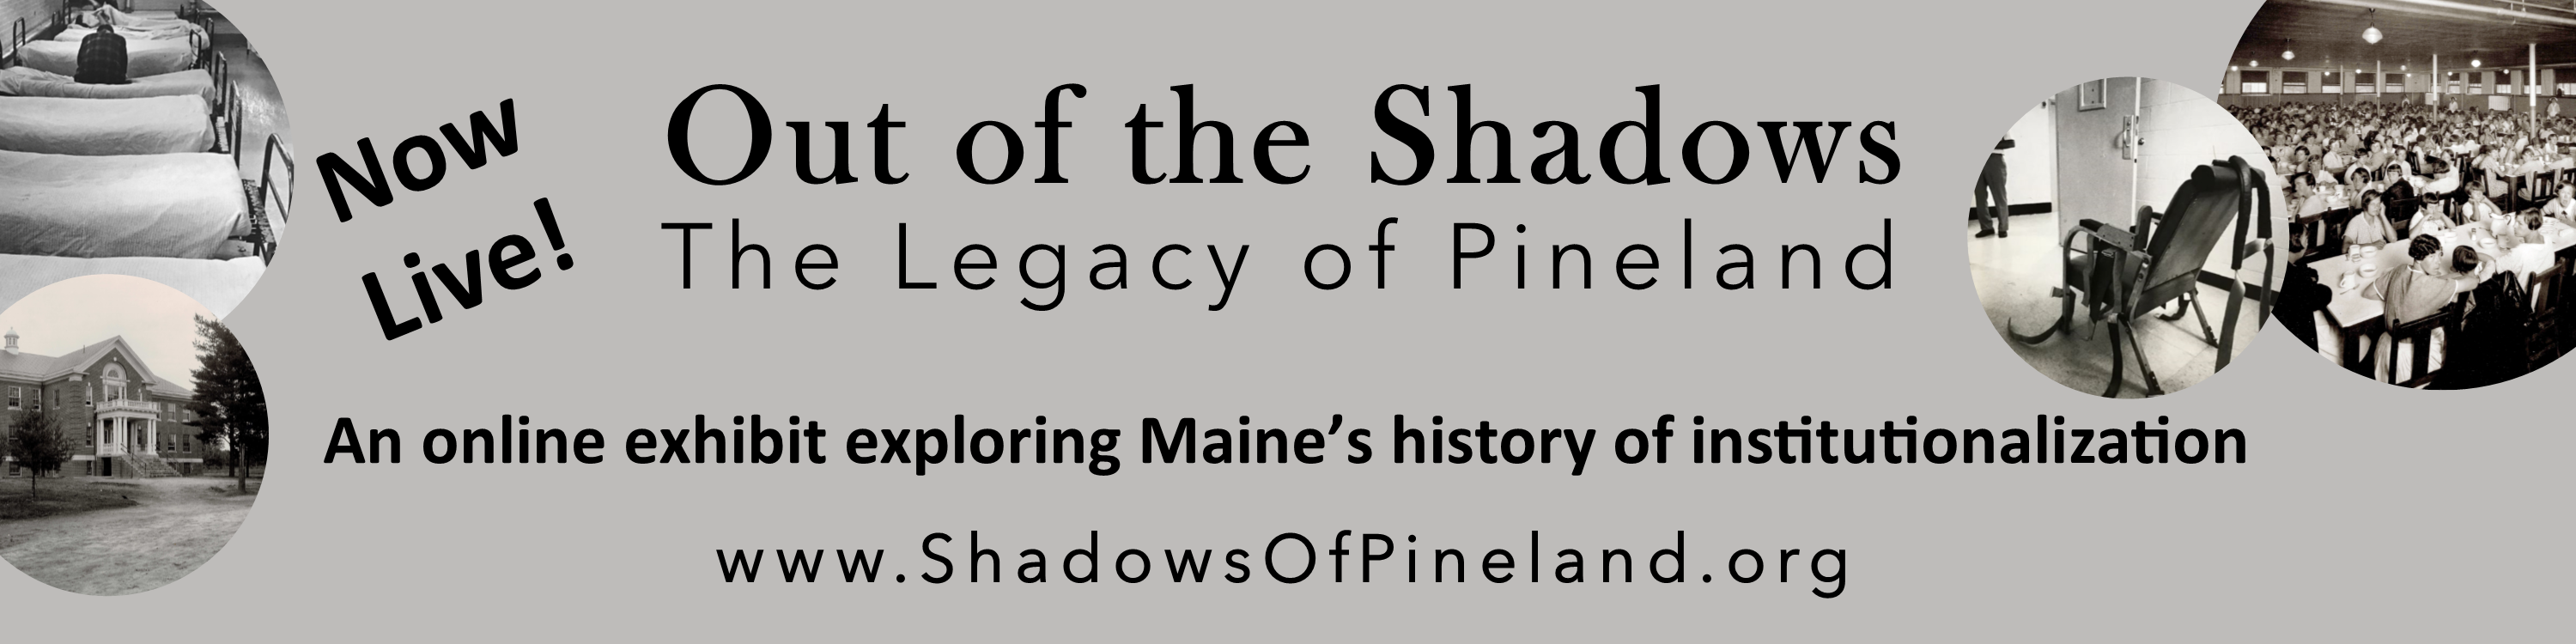 Now Live! Out of the Shadows: The Legacy of Pineland - An online exhibit exploring Maine's history of institutionalization - www.shadowsofpineland.org